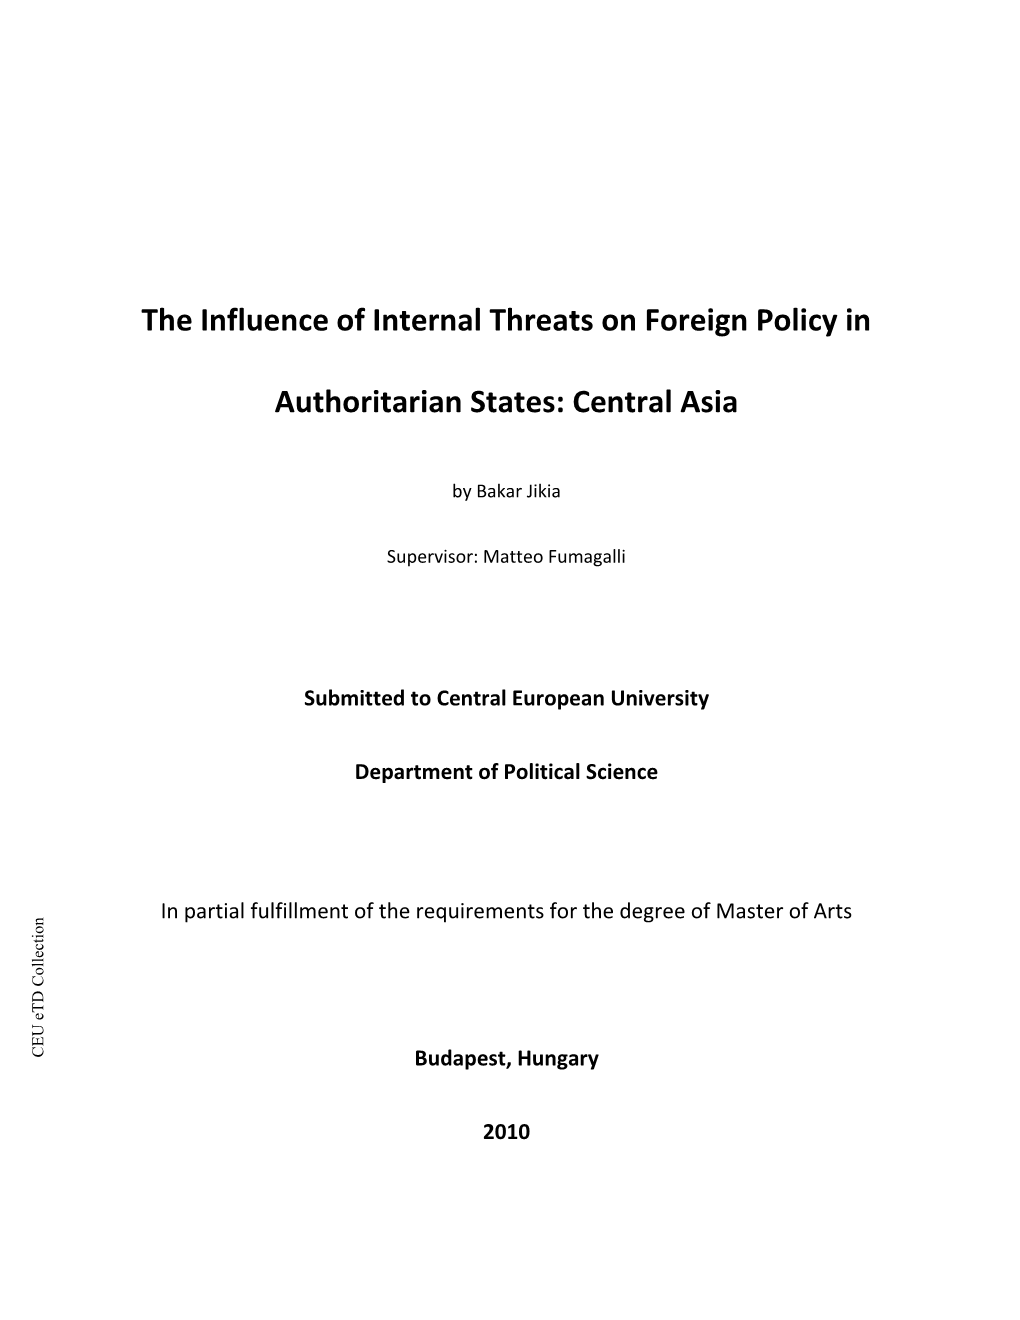 The Influence of Internal Threats on Foreign Policy in Authoritarian States: Central Asia